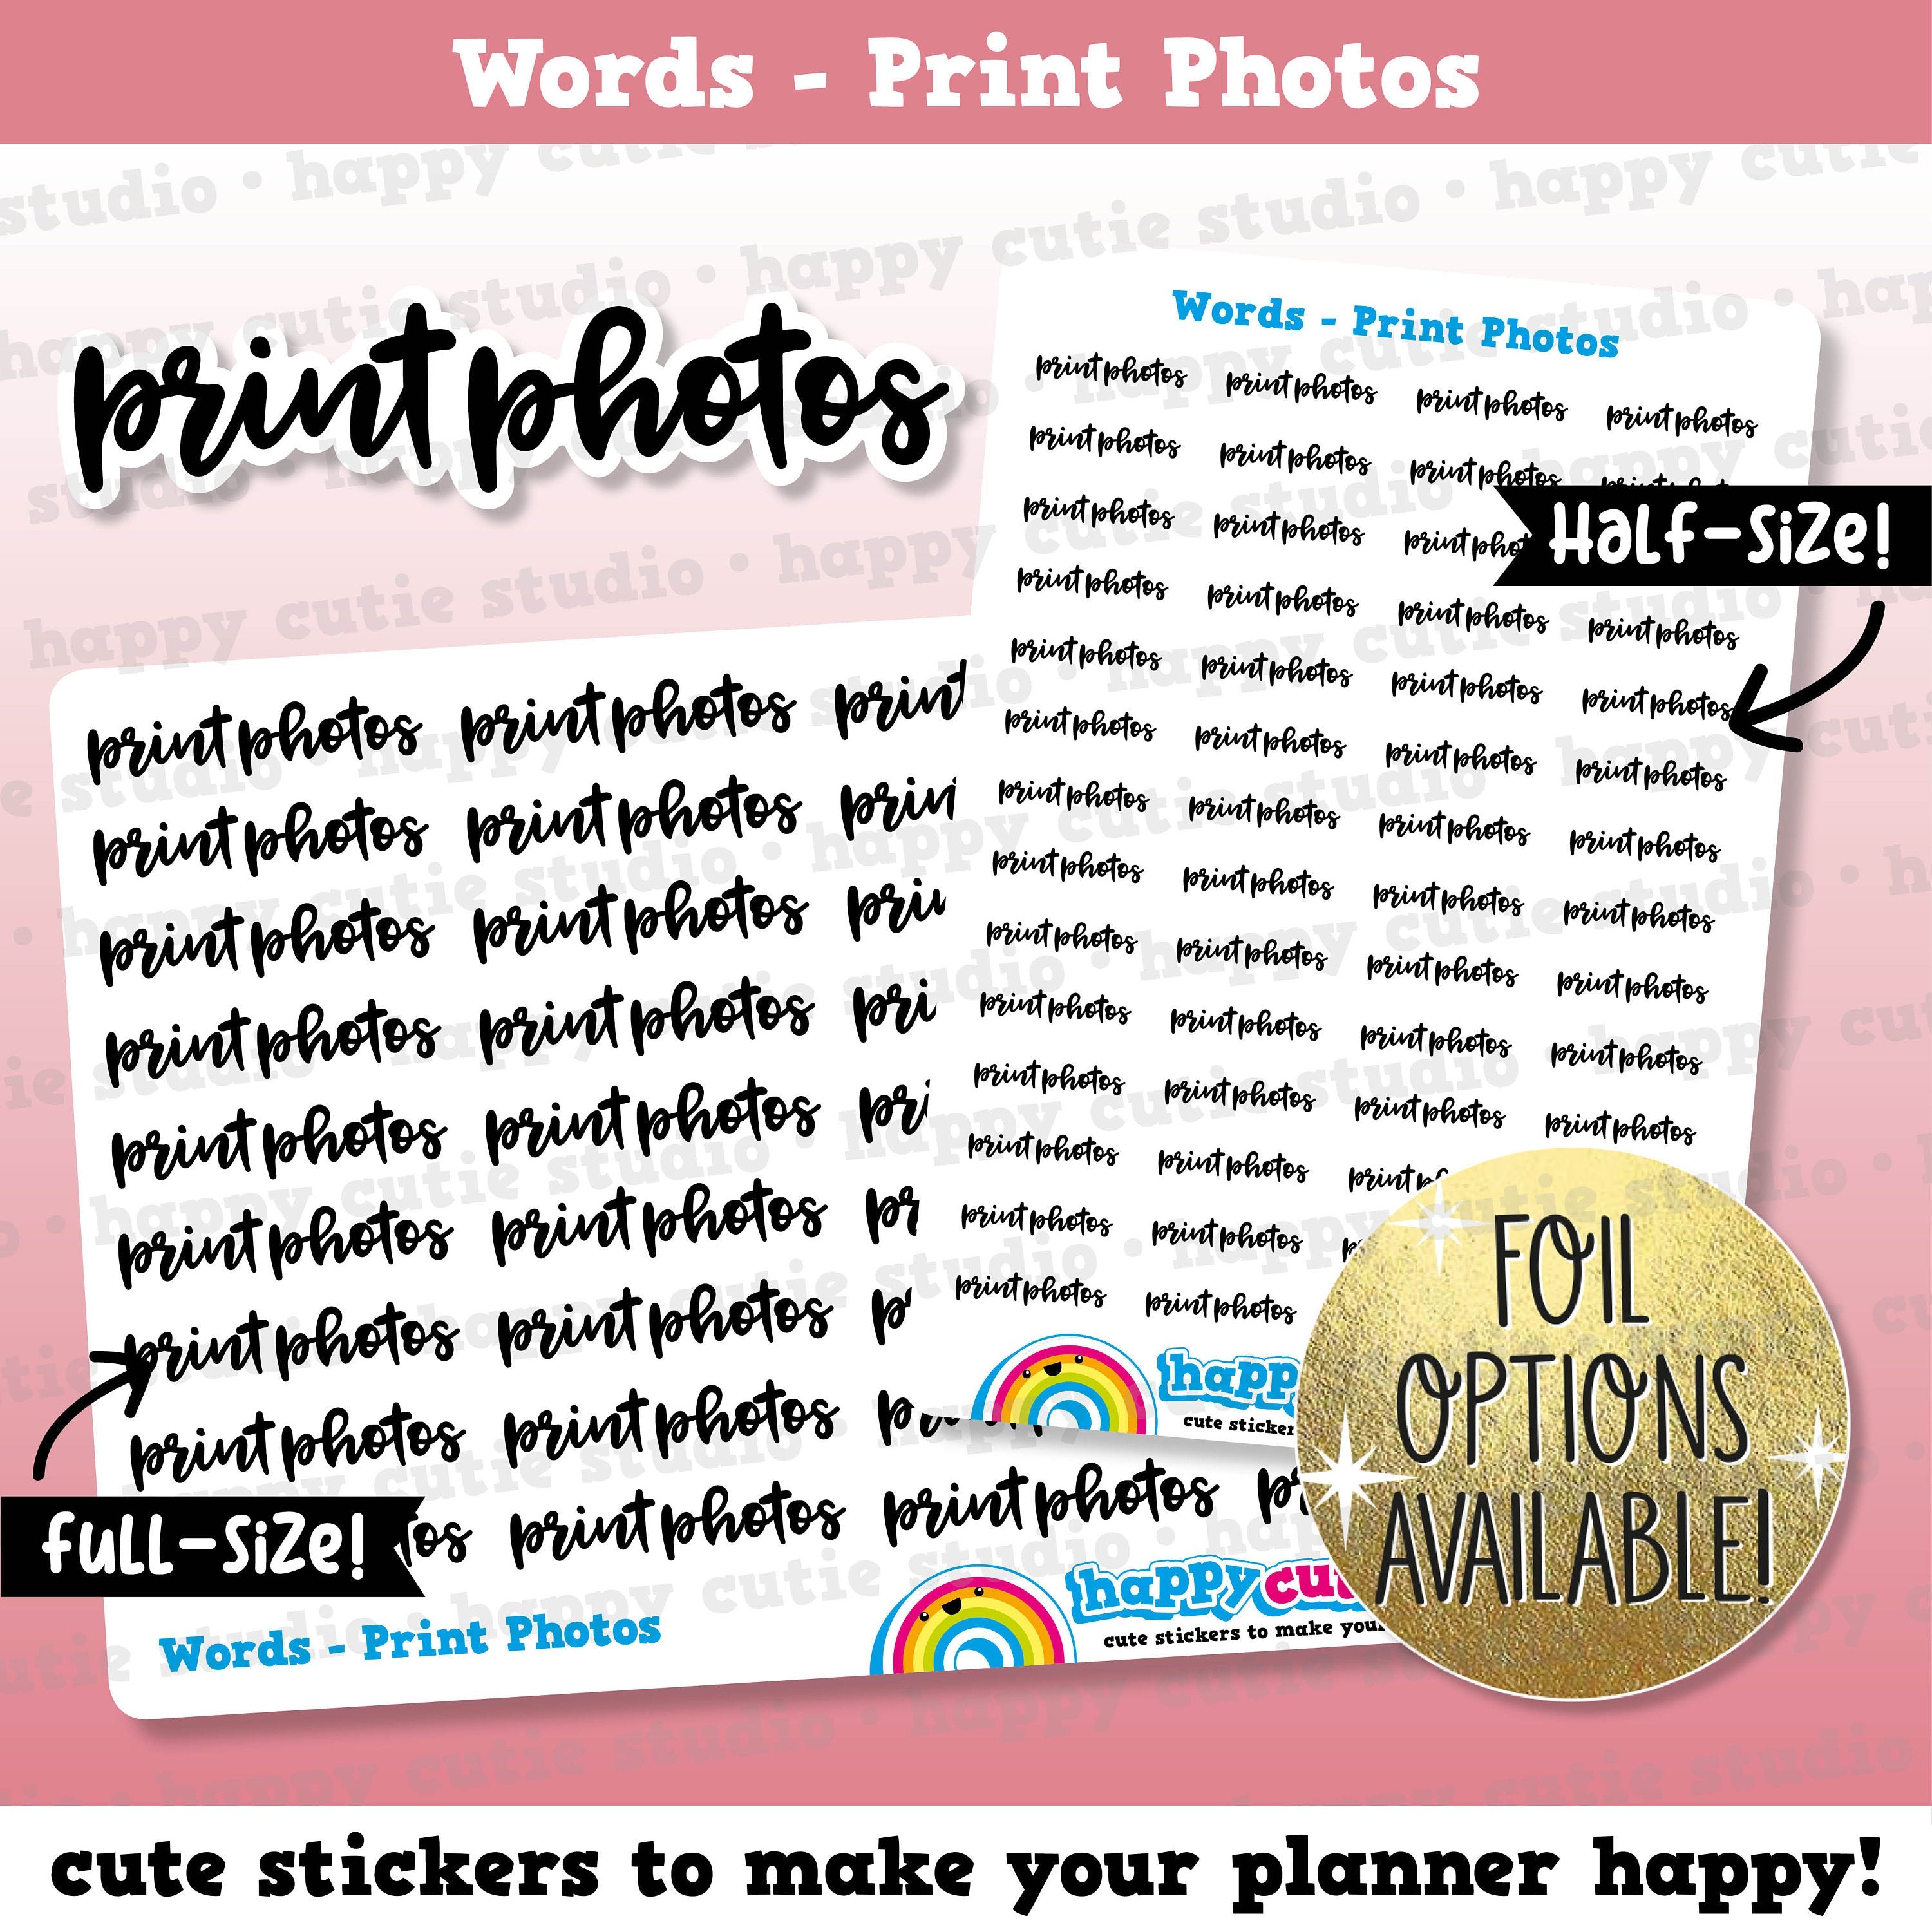 Print Photos Words/Functional/Foil Planner Stickers